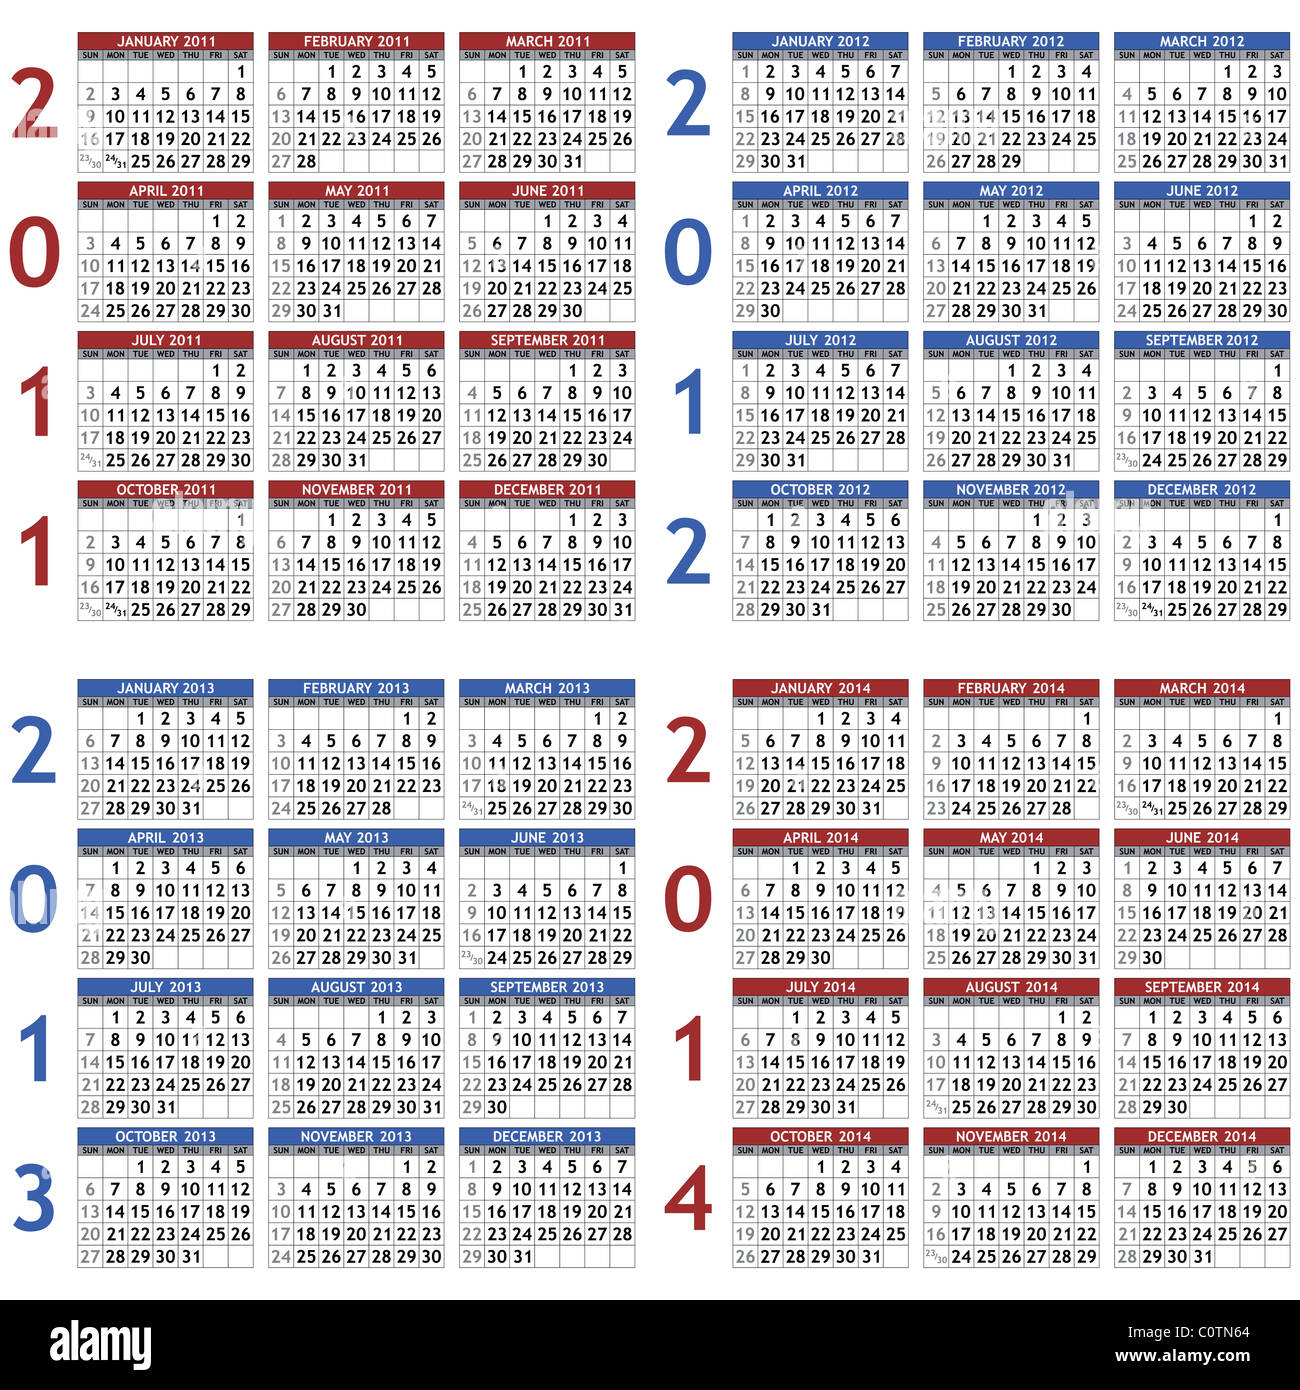 Collection of classic calendar templates for years 2011 - 2014 Stock Photo